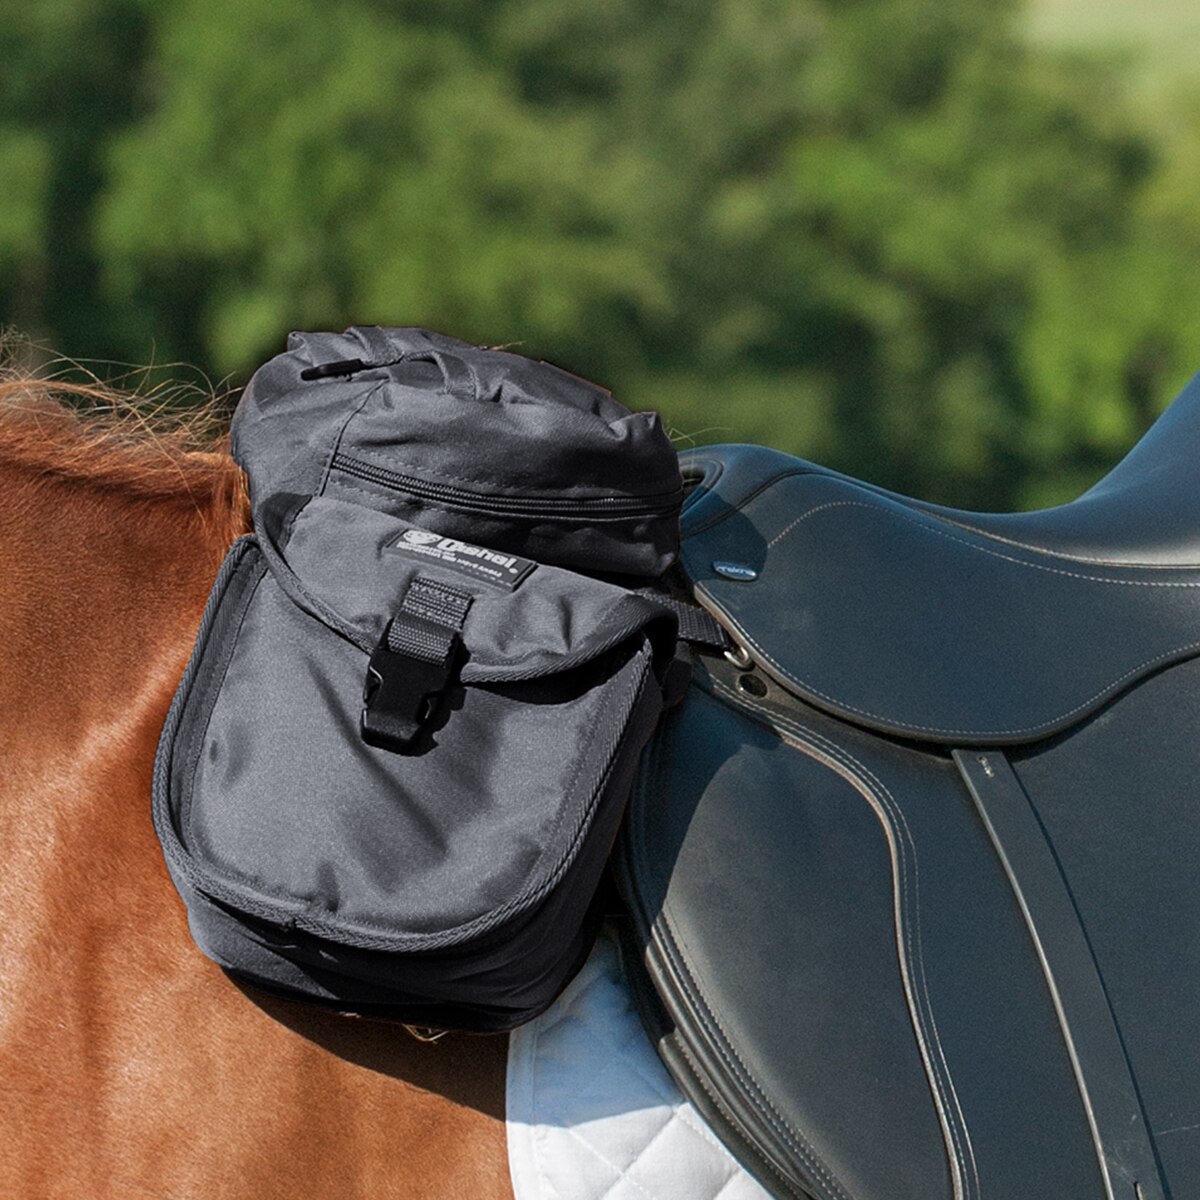 Dura-Tech® Padded English Saddle Cases | Schneiders